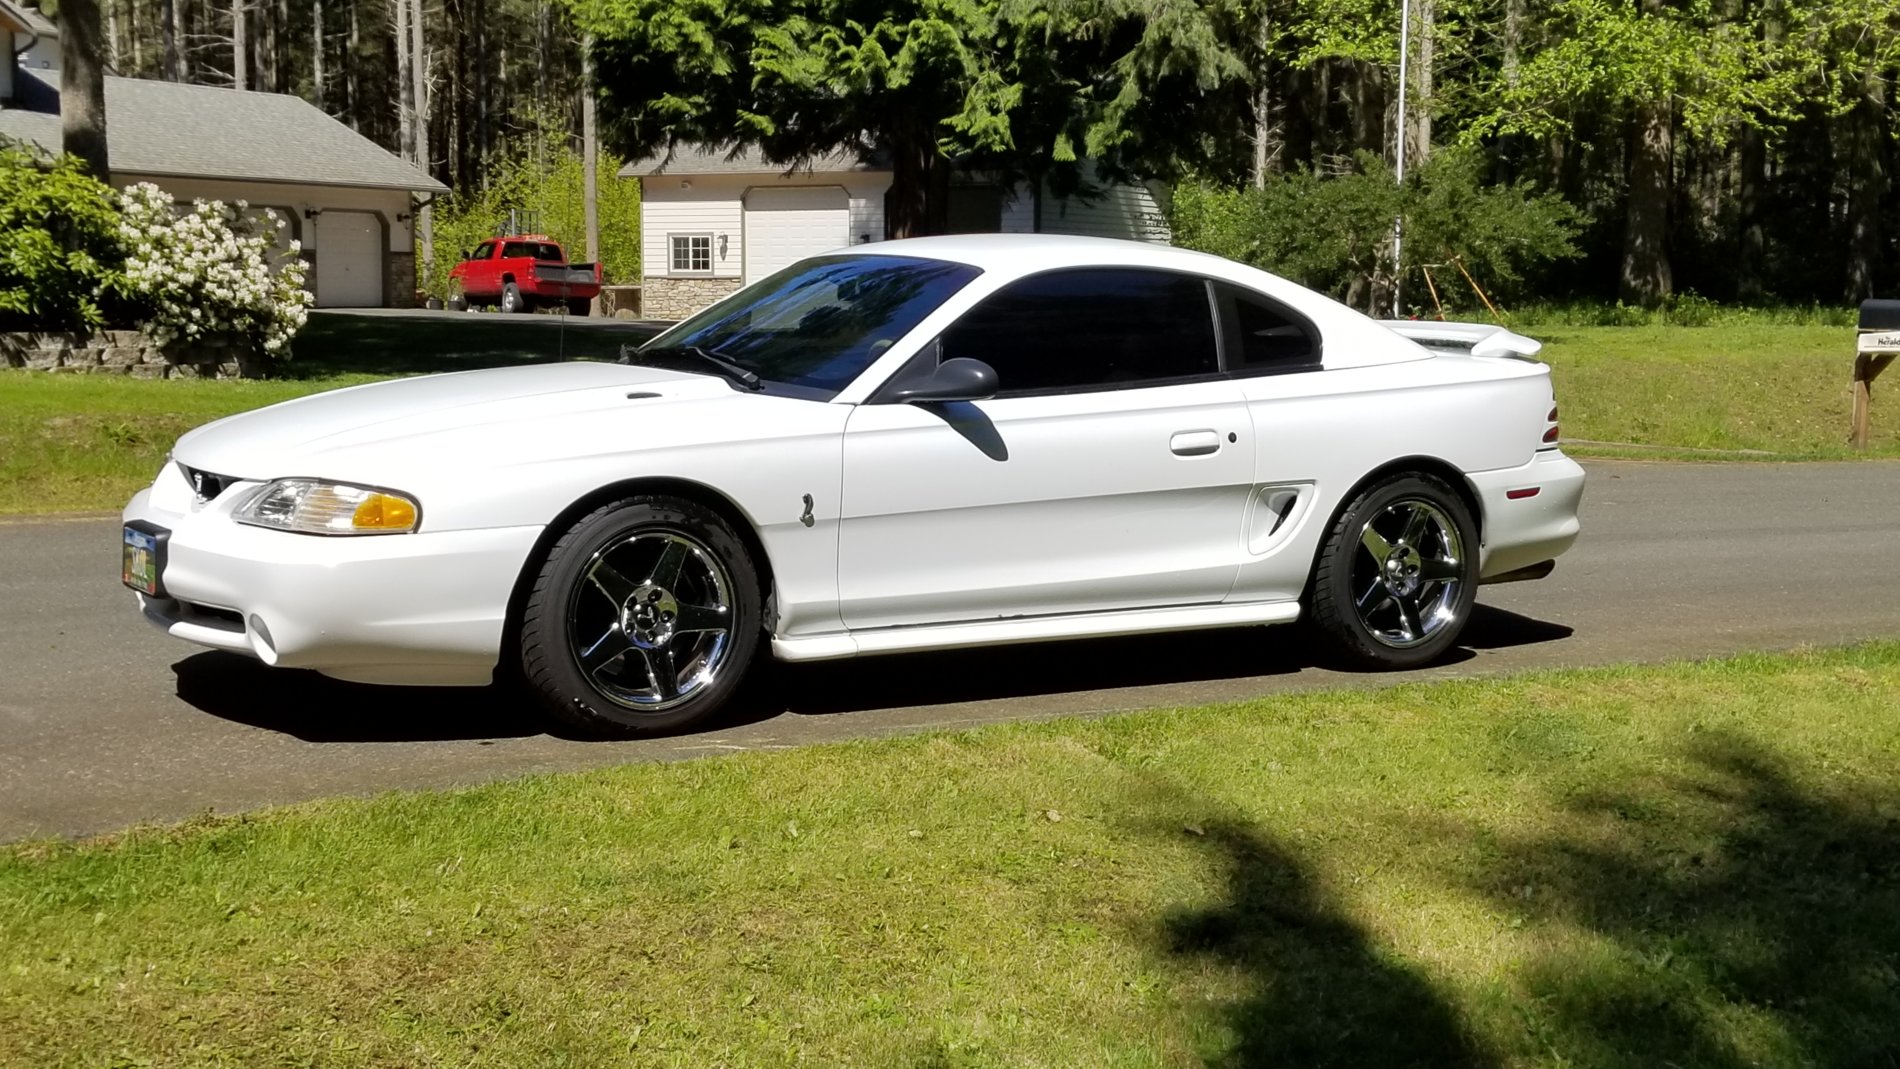 S650 Mustang Post Pictures of Your Car 20180502_142804